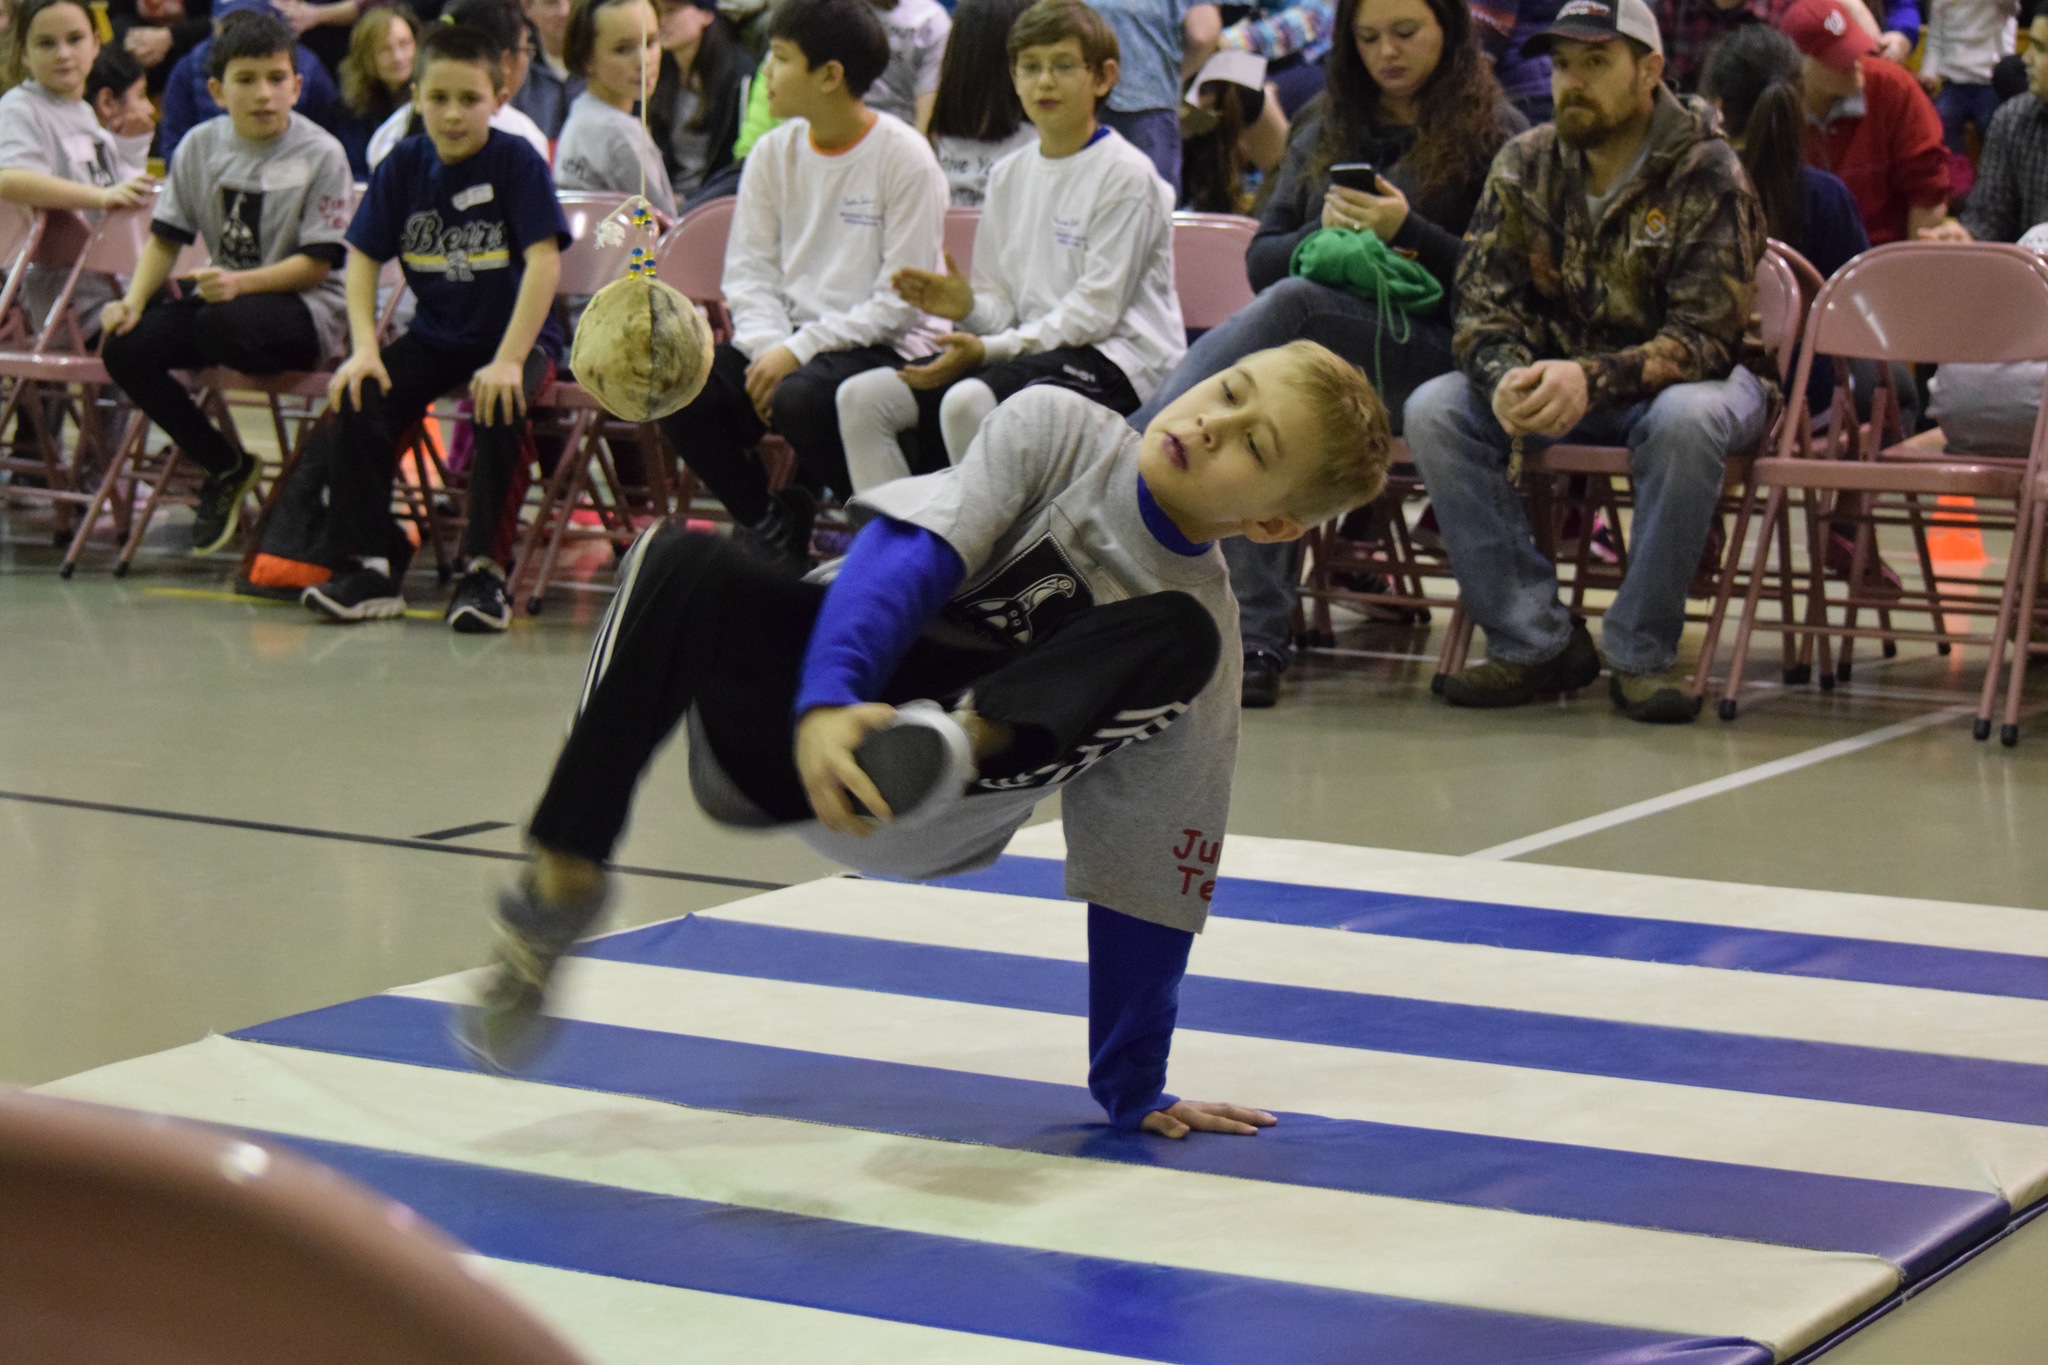 An Auke Bay Elementary School student competes in the 1-foot high kick as part of the Native Youth Olympics Friday at Riverbend Elementary. (Nolin Ainsworth | Juneau Empire)